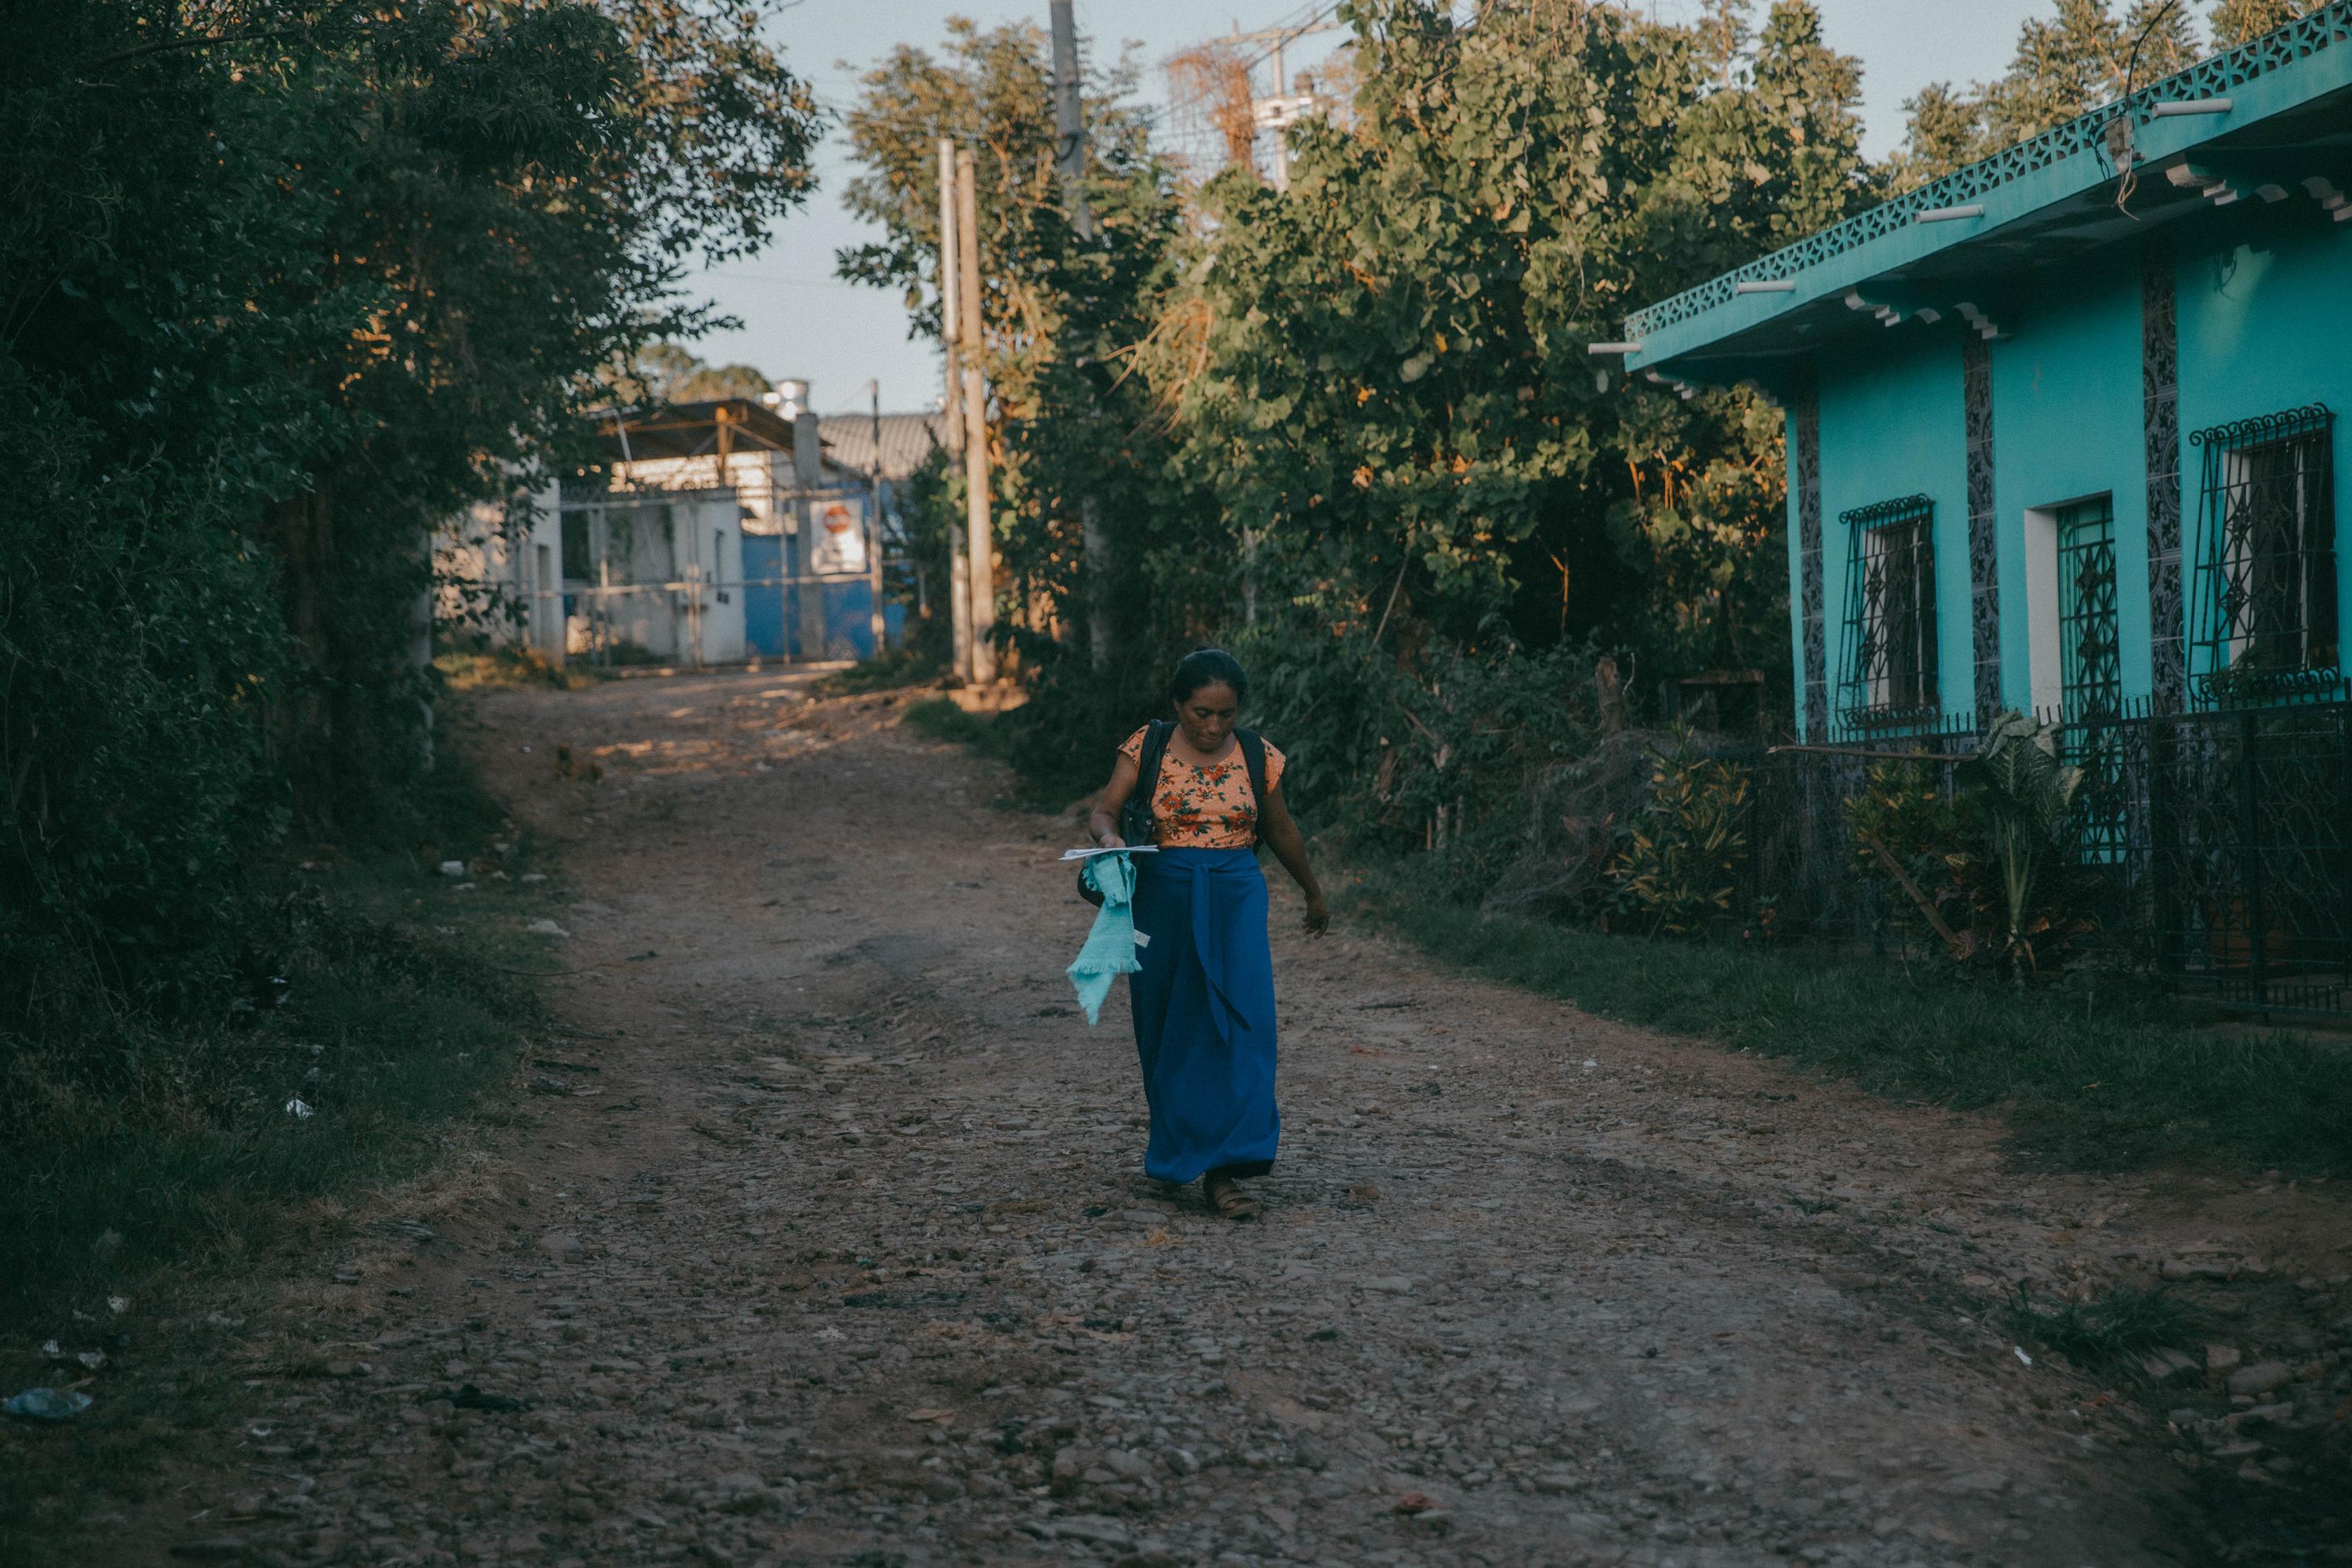 On December 13, 2023, Virginia Cali, 50 years old, walks past the entrance of the Ilobasco Rehabilitation Farm after inquiring about the process to release her son, Samuel, who had been acquitted of illicit association. That day, and the next, Virginia left without her son as a result of bureaucratic delays. It would take nearly two more months before Samuel was finally released.